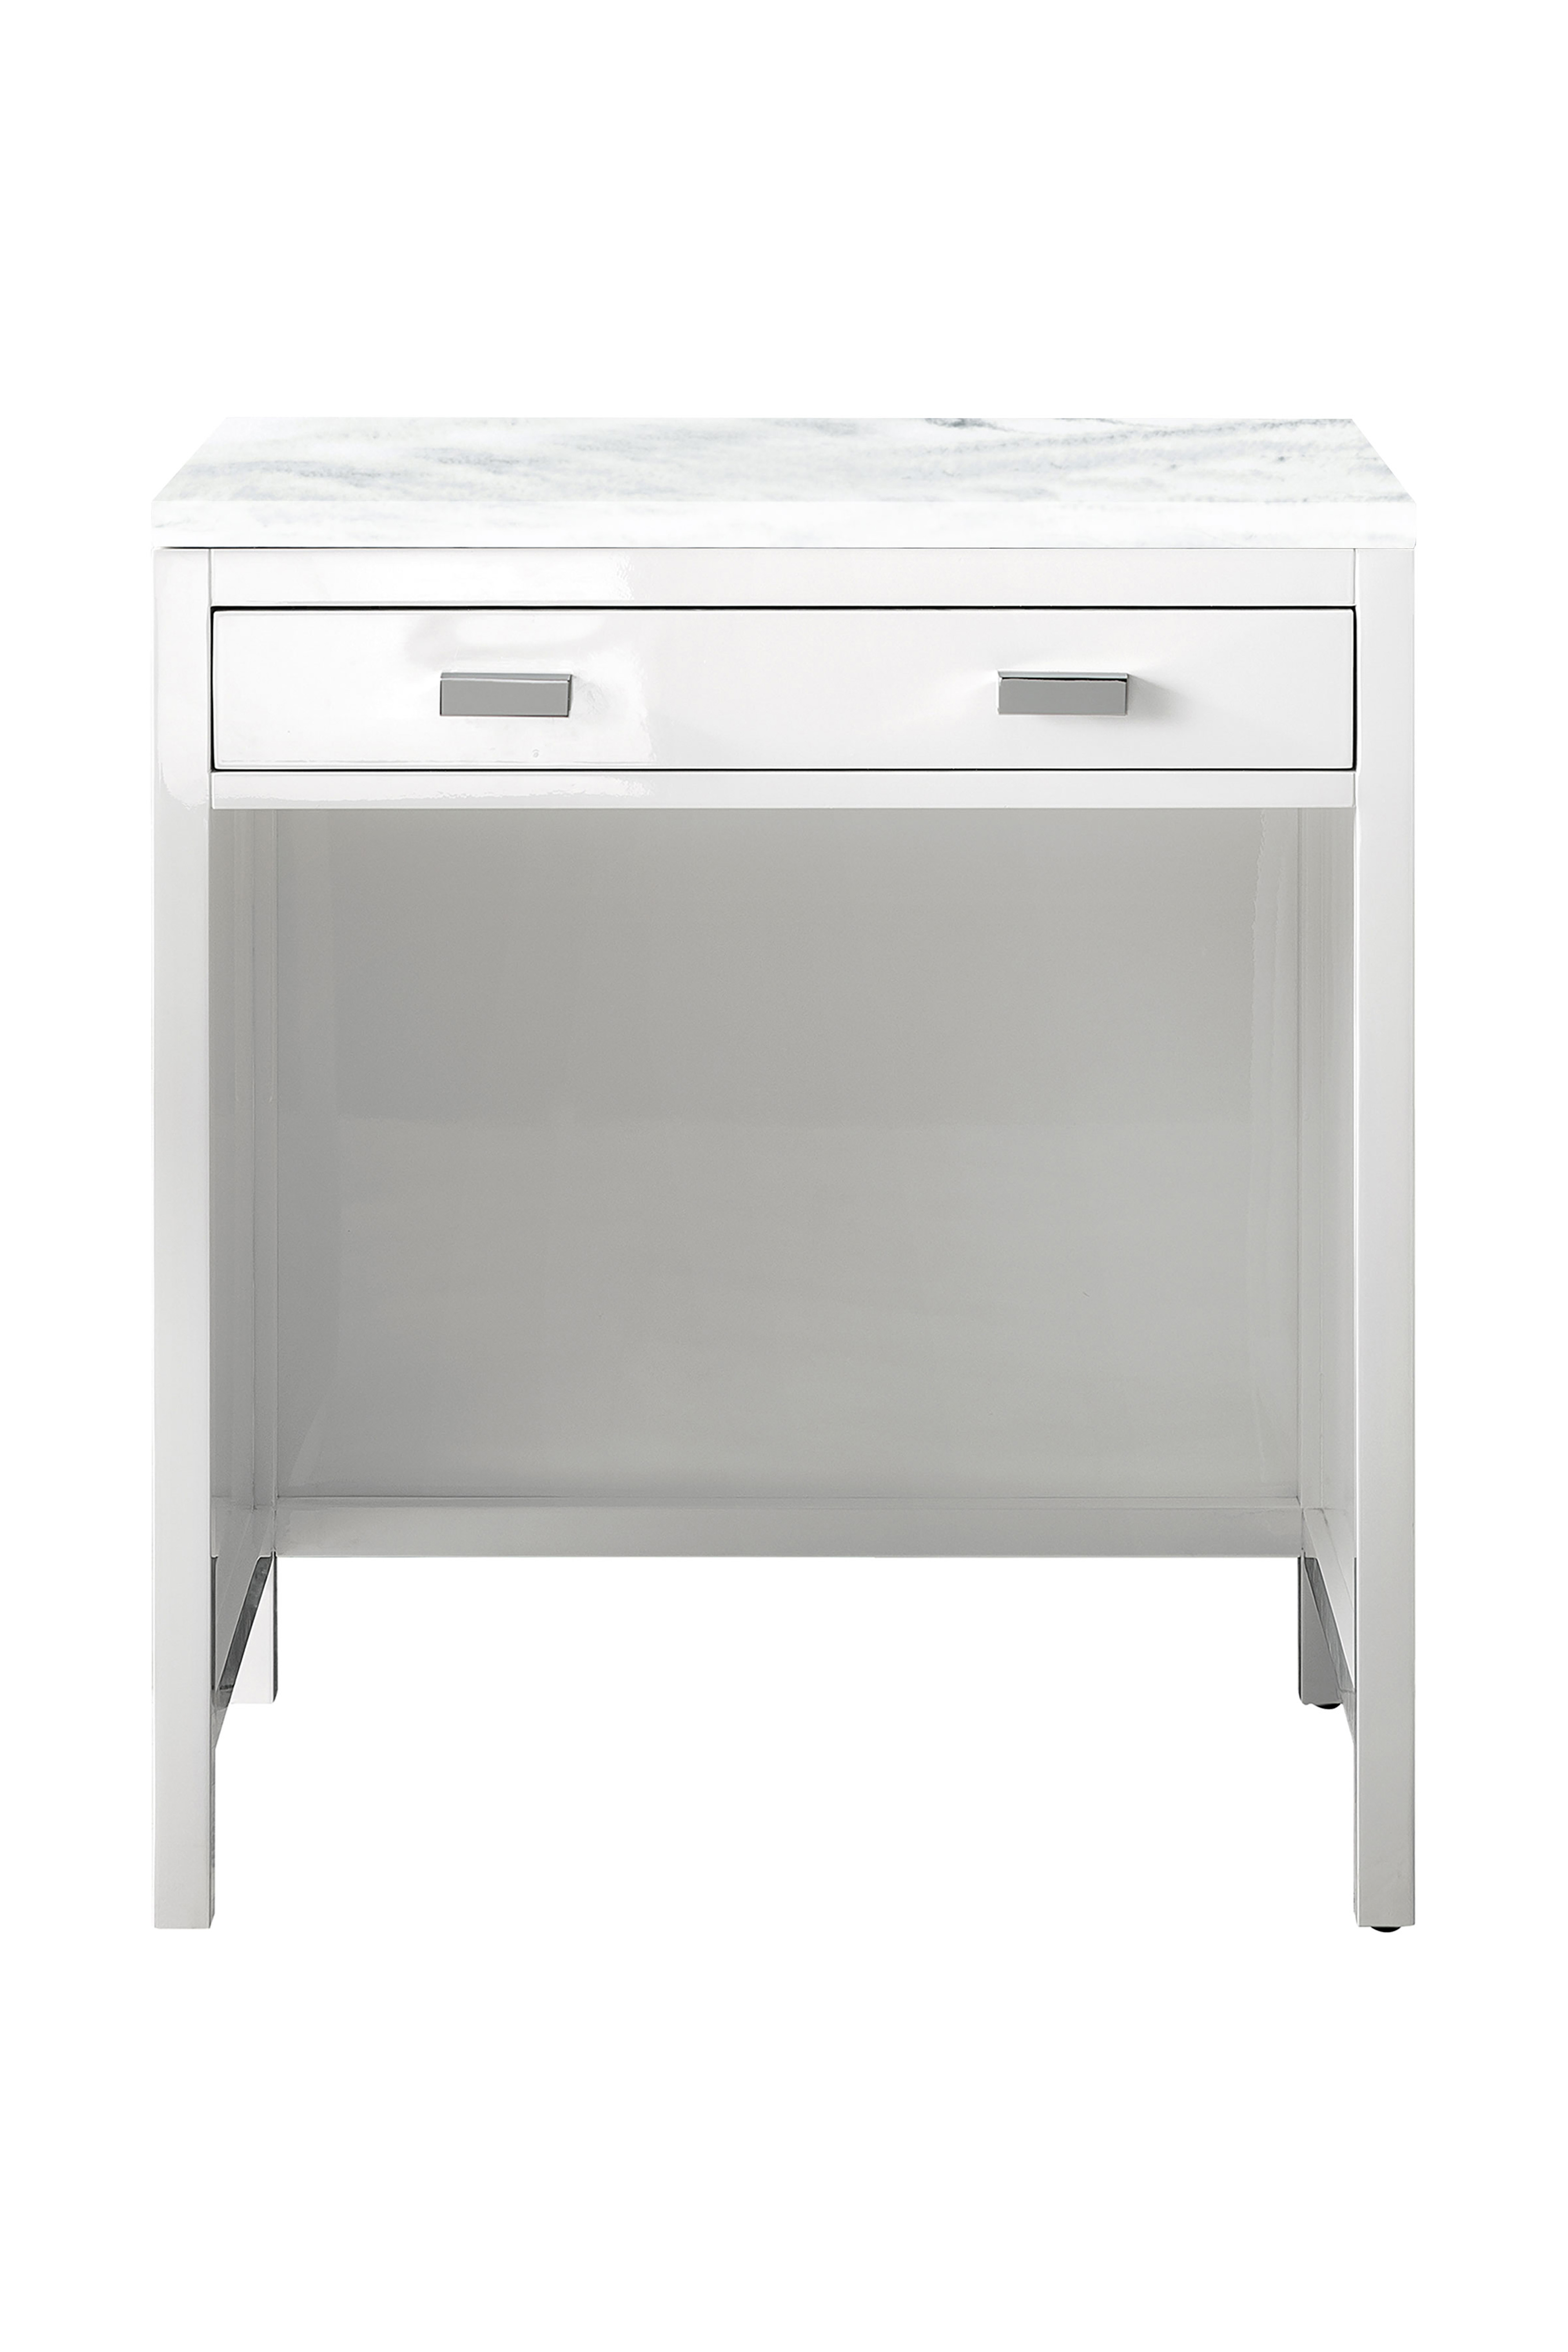 James Martin E444-CU30-GW-3AF Addison 30" Free-standing Countertop Unit (Makeup Counter), Glossy White w/ 3 CM Arctic Fall Solid Surface Top